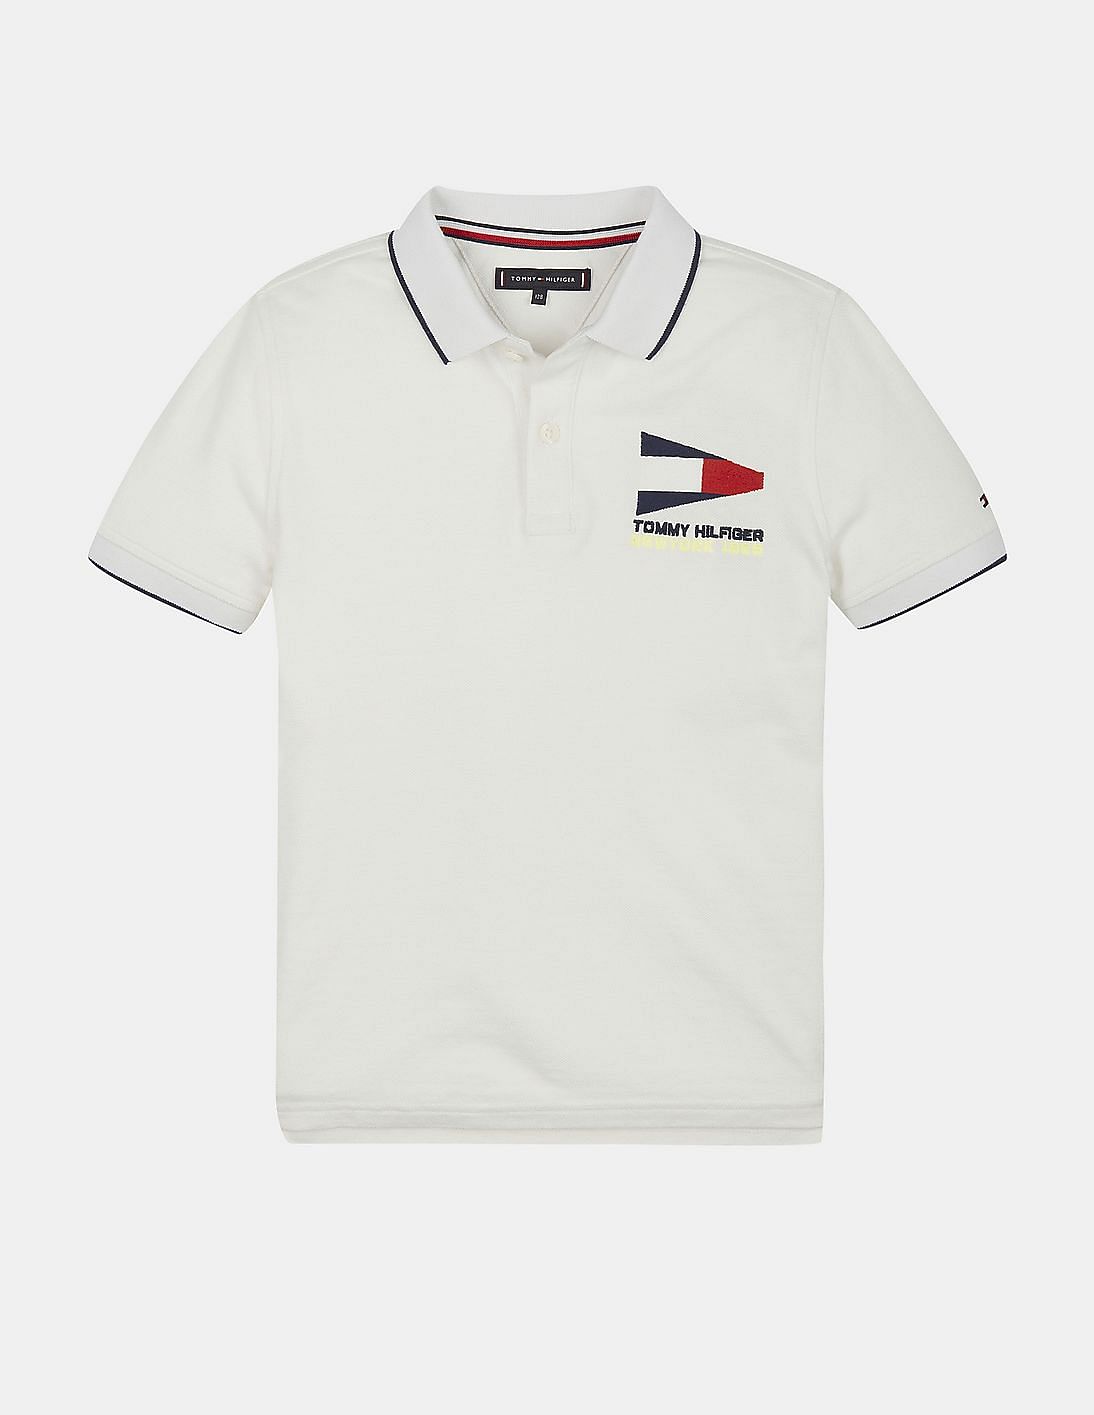 Buy Tommy Hilfiger Kids Boys White Cotton Short Sleeve Solid Polo Shirt ...